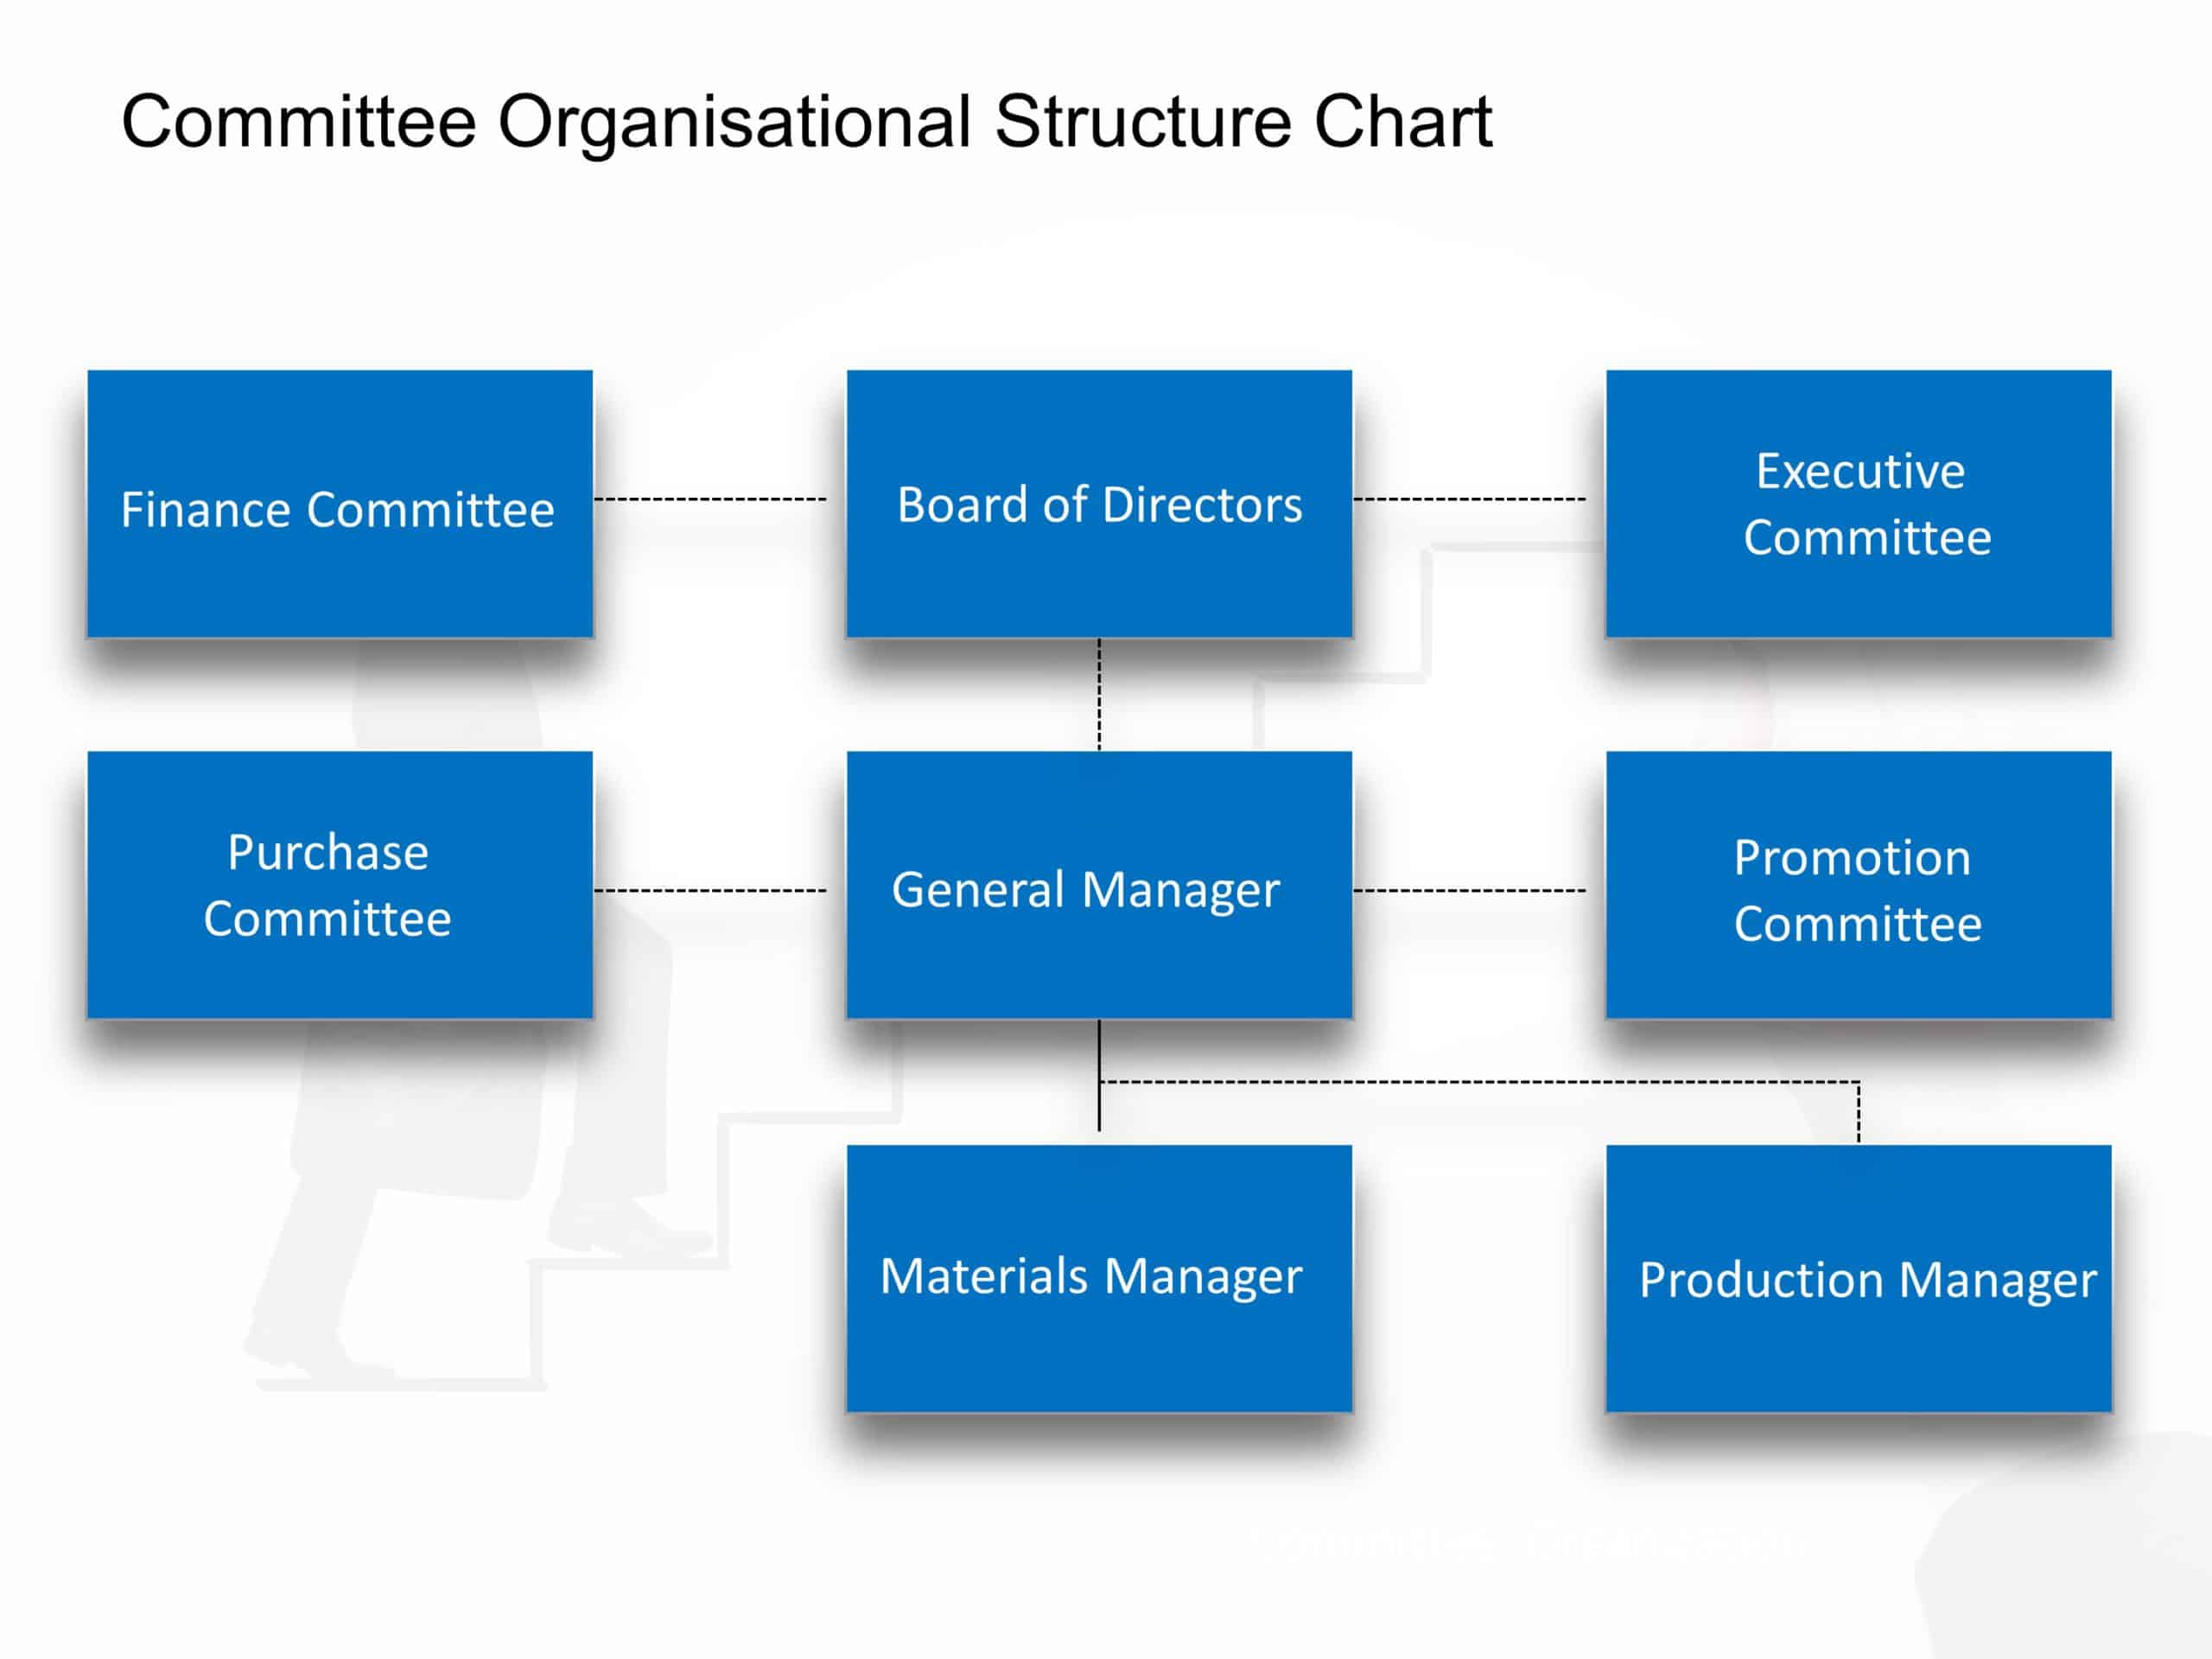 Committee Organisational Chart PowerPoint Template